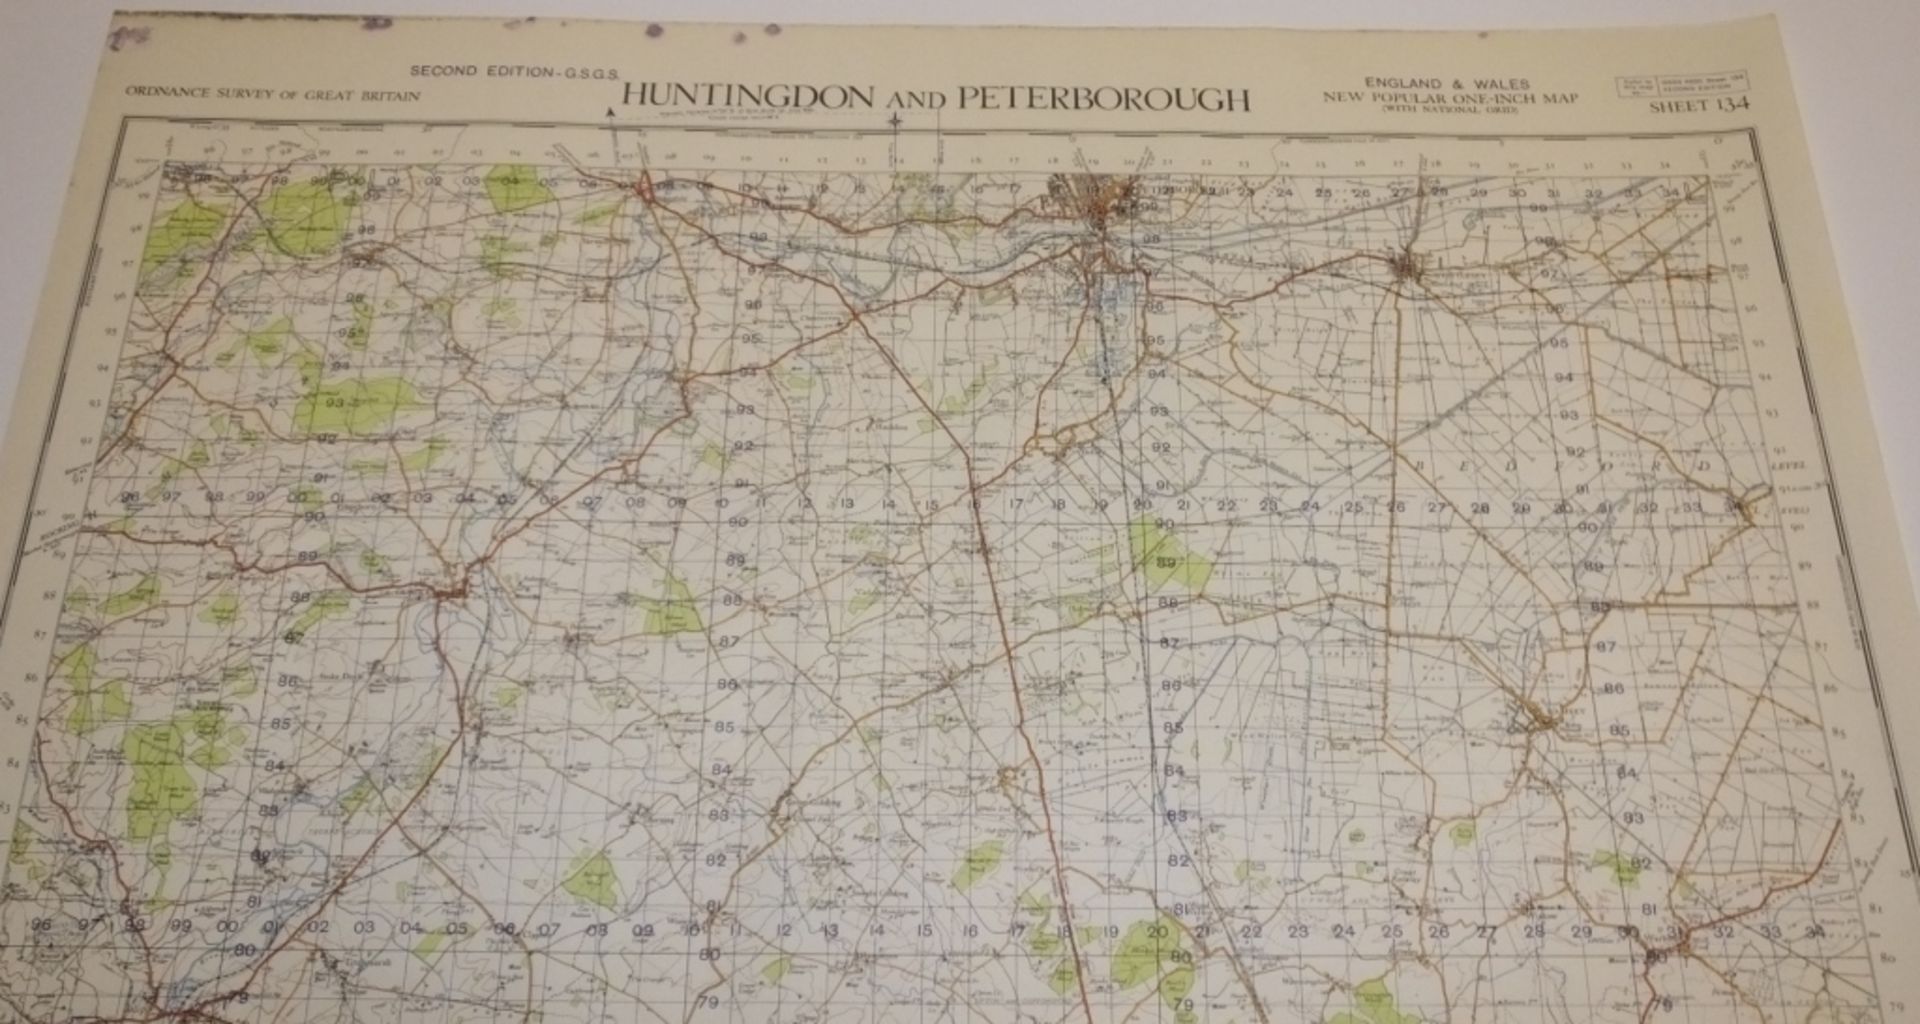 26x ENGLAND & WALES MAP HUNTINGDON PETERBOROUGH 1INCH 1MILE 1952 2ND EDITION 4620 GSGS SHE - Bild 3 aus 5